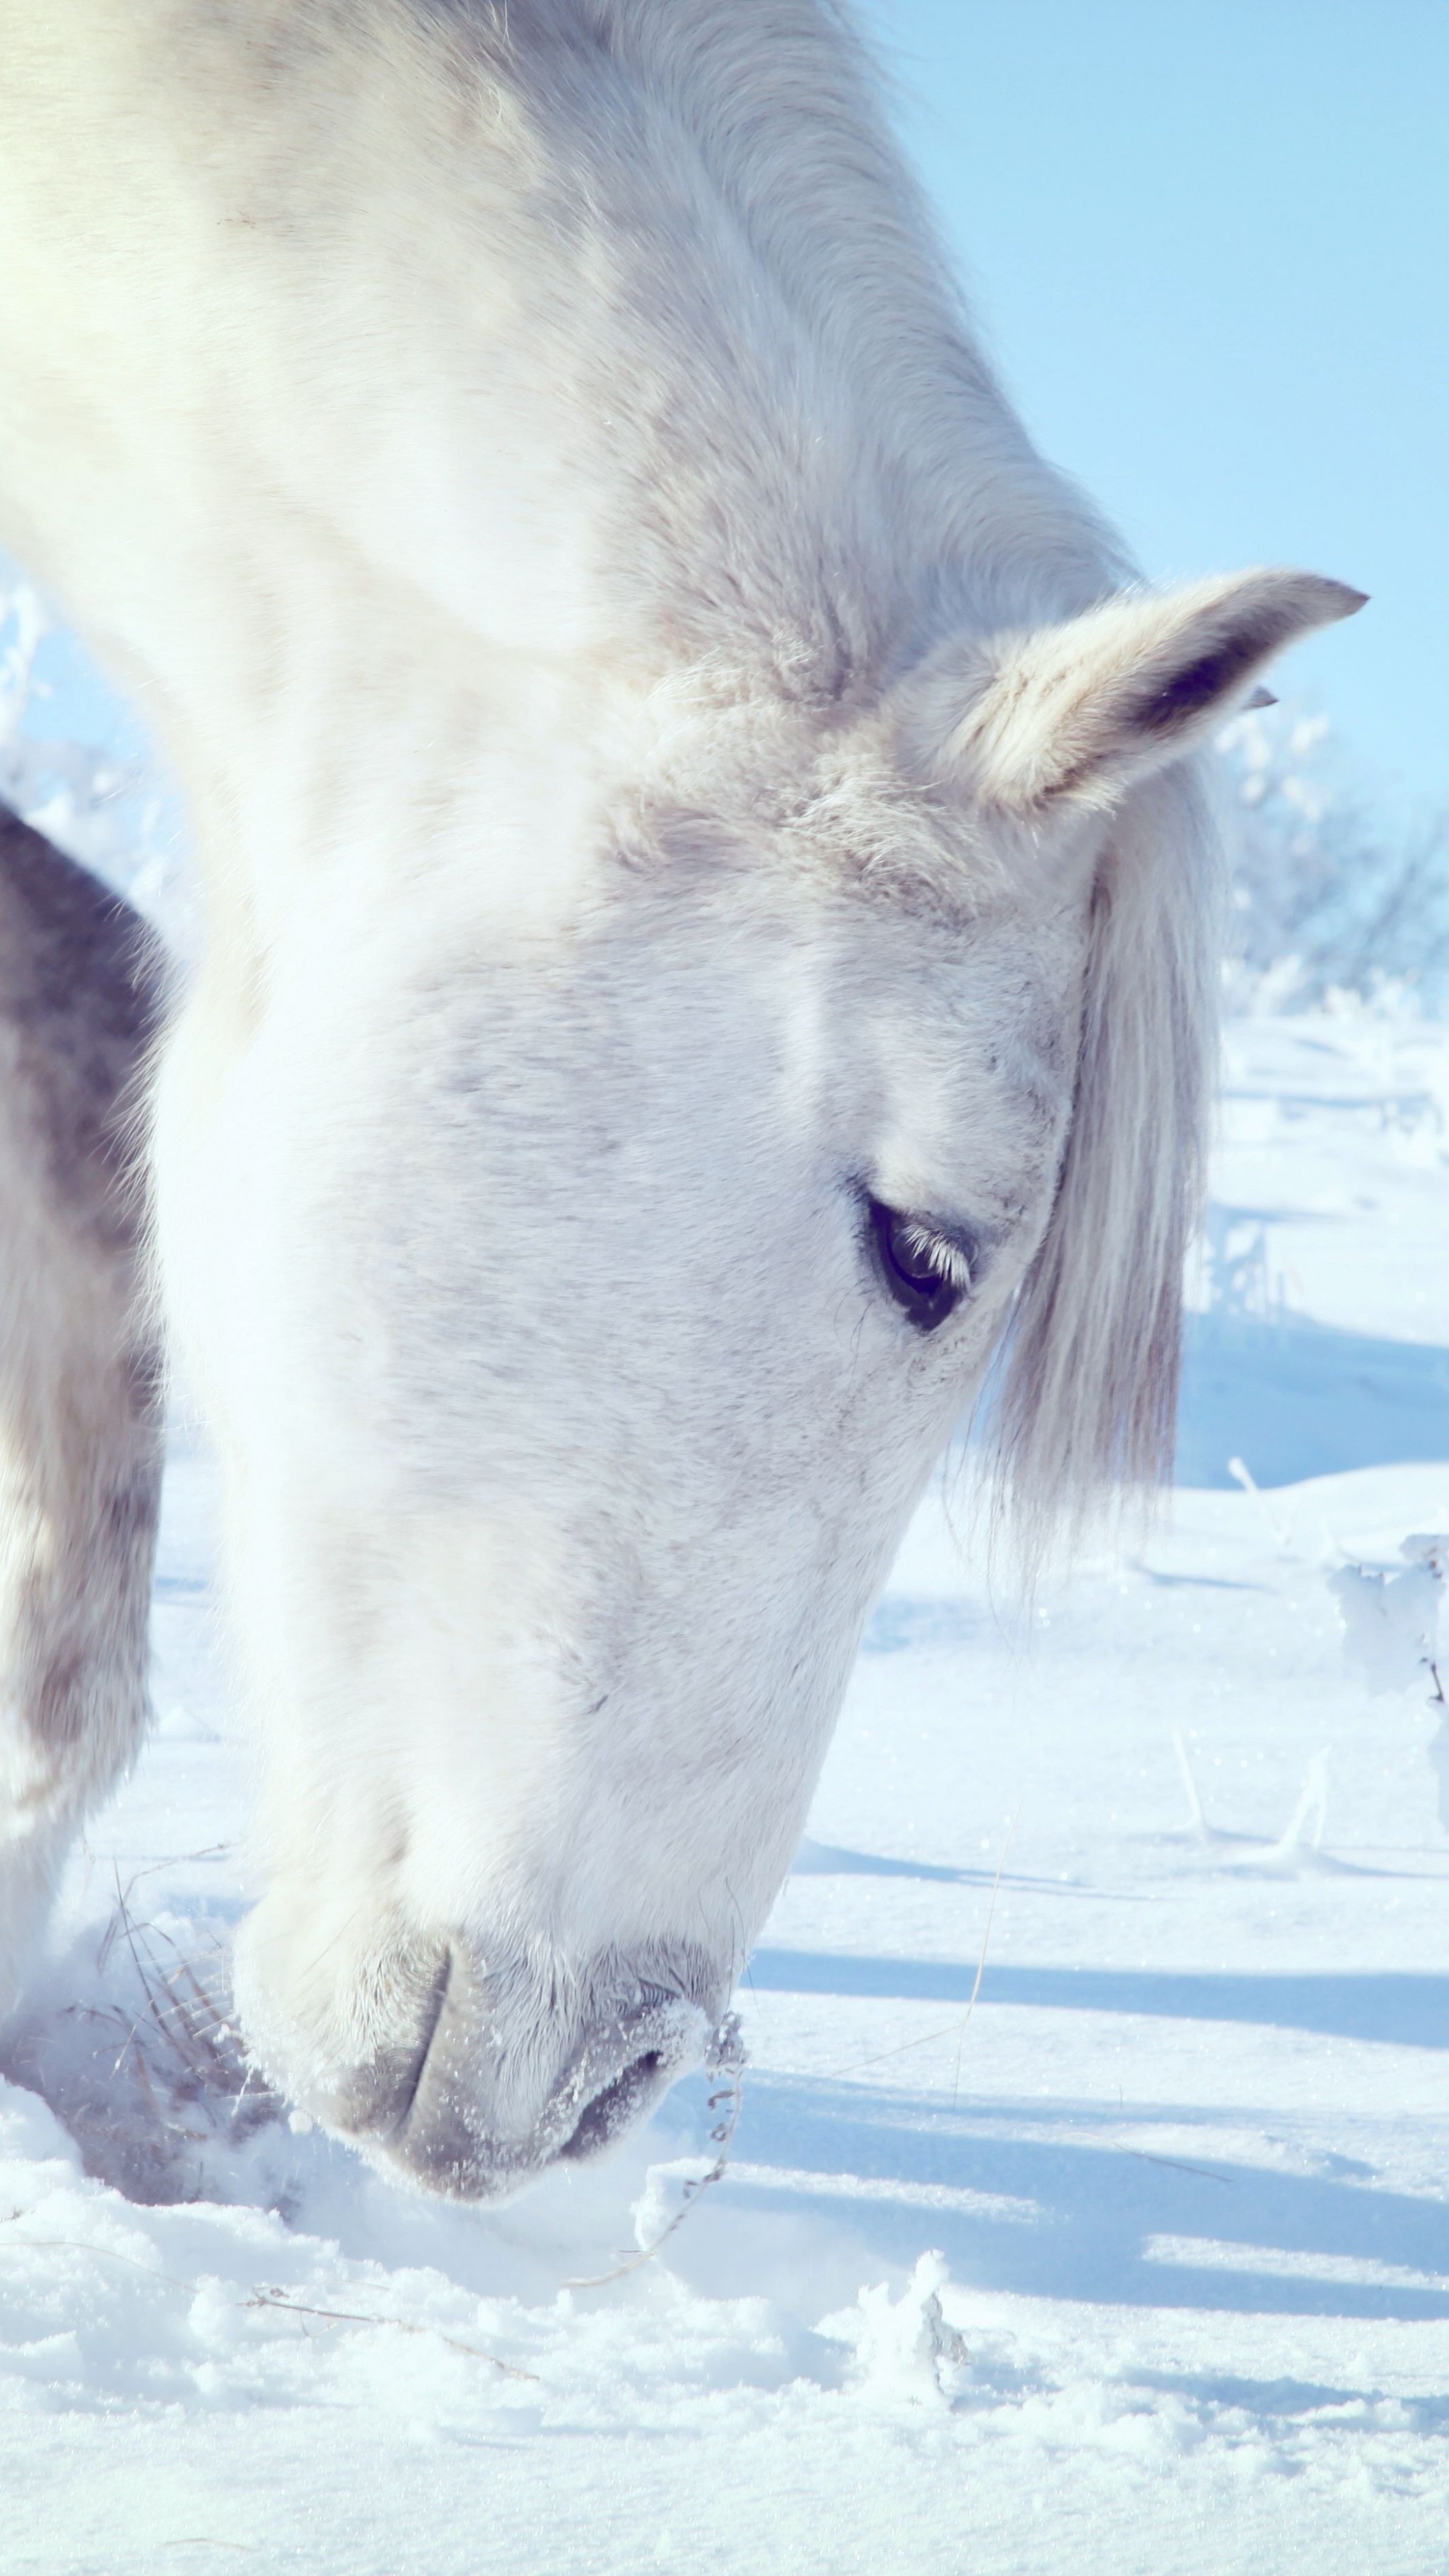 Horses in the Snow, Snowy mane, Winter beauty, Majestic creatures, 2160x3840 4K Phone